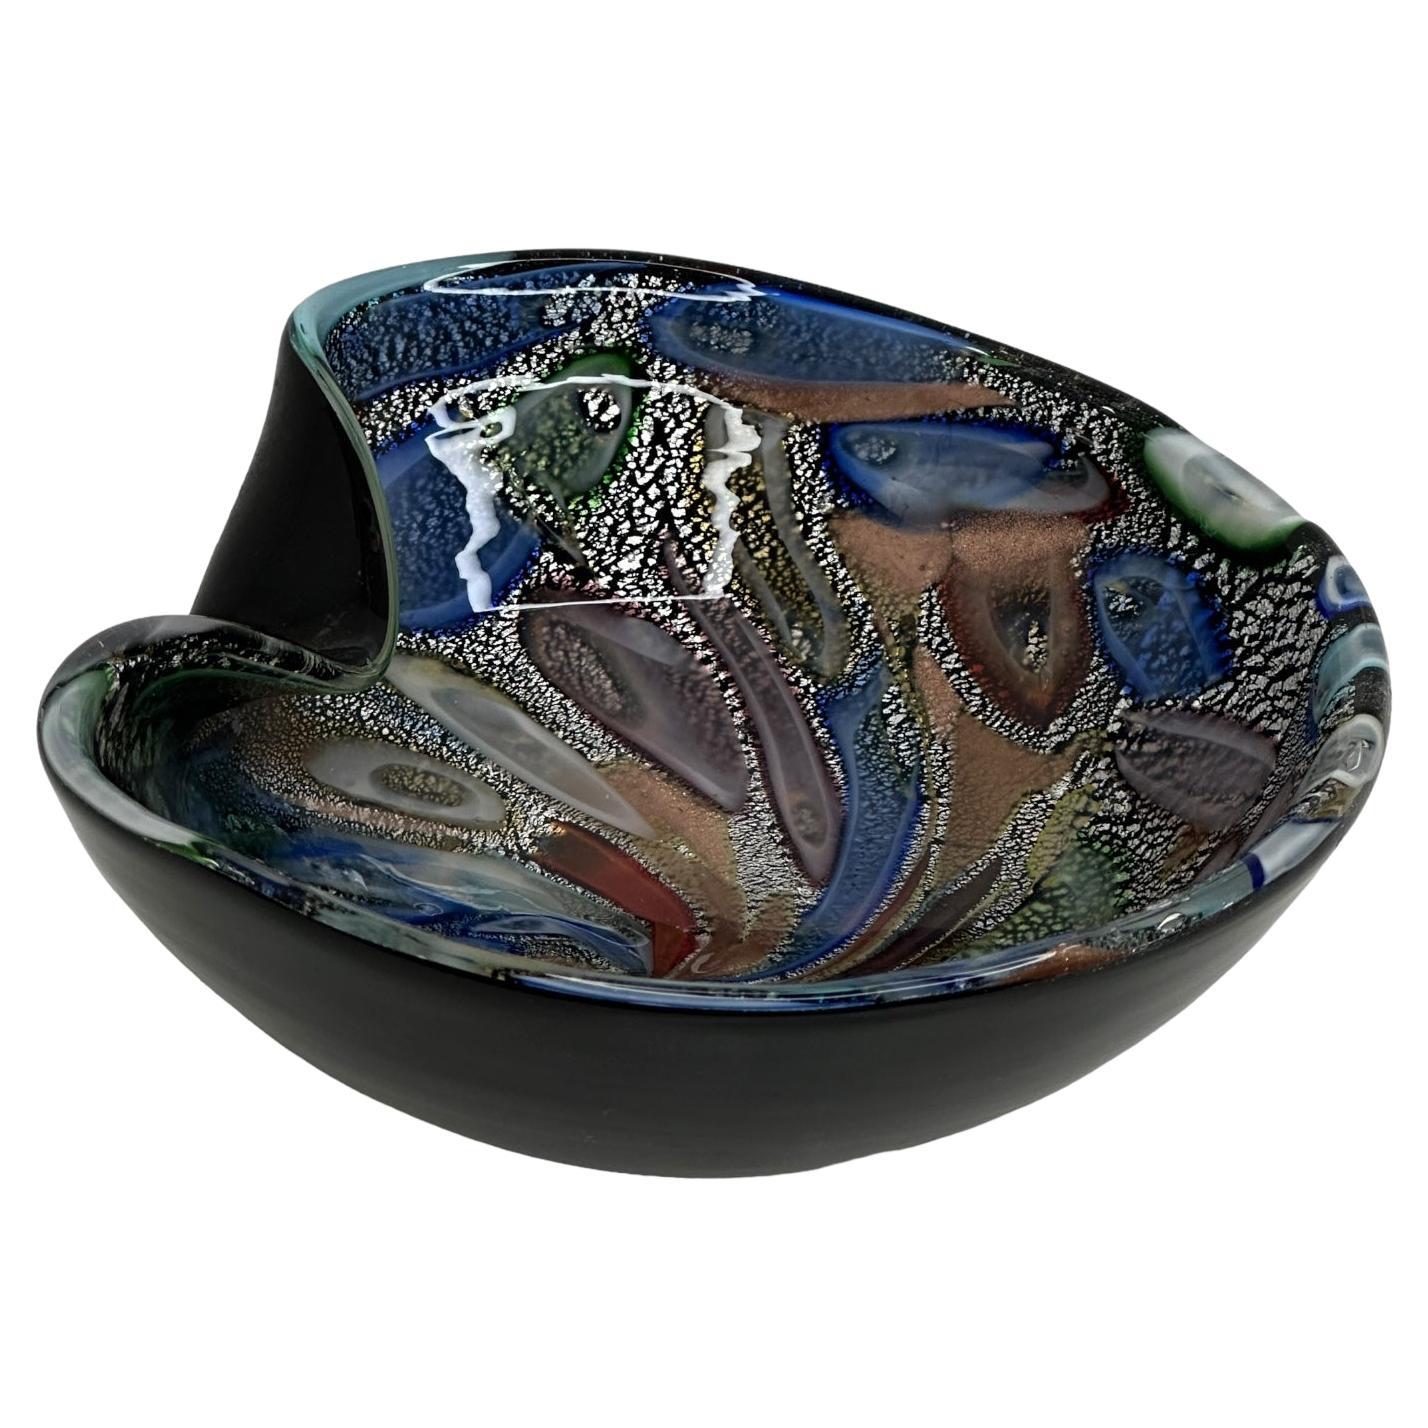 Gorgeous hand blown Murano art glass piece with Sommerso and bullicante techniques featuring abstract polychrome designs throughout the bowl. A beautiful organic shaped bowl, catchall or centre piece, Venice, Murano, Italy, 1960s. Found at an estate